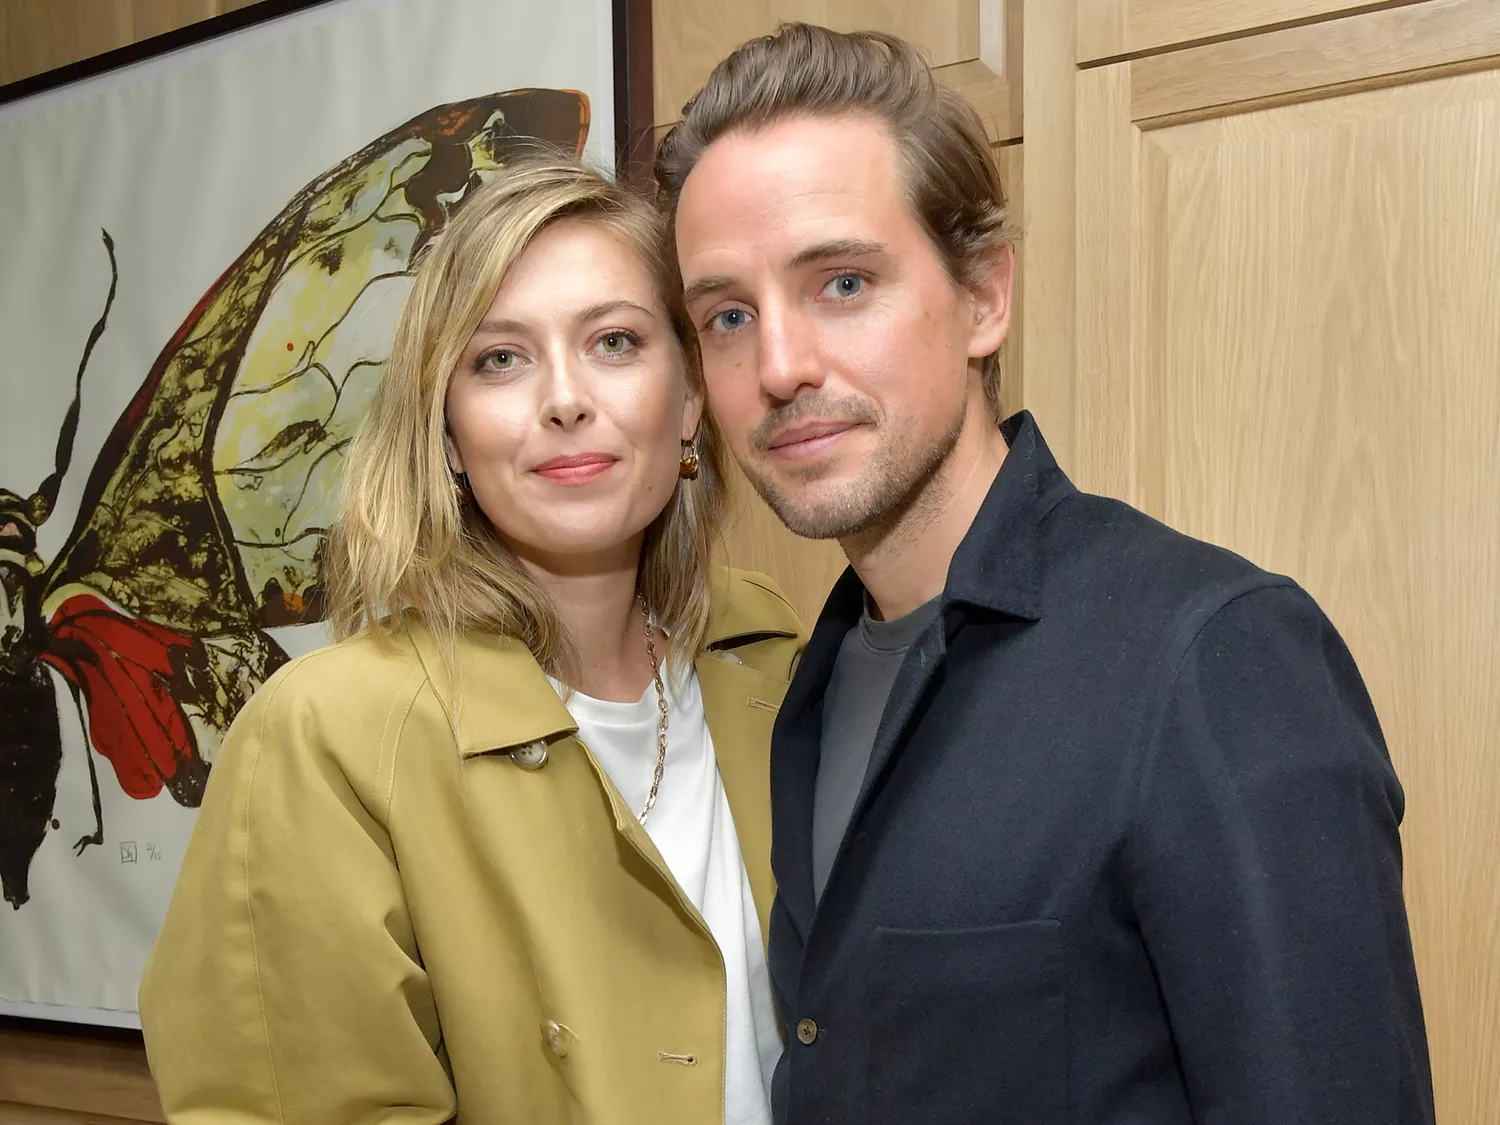 Maria Sharapova (L) and Alexander Gilkes attend a dinner in celebration of BoF West 2019